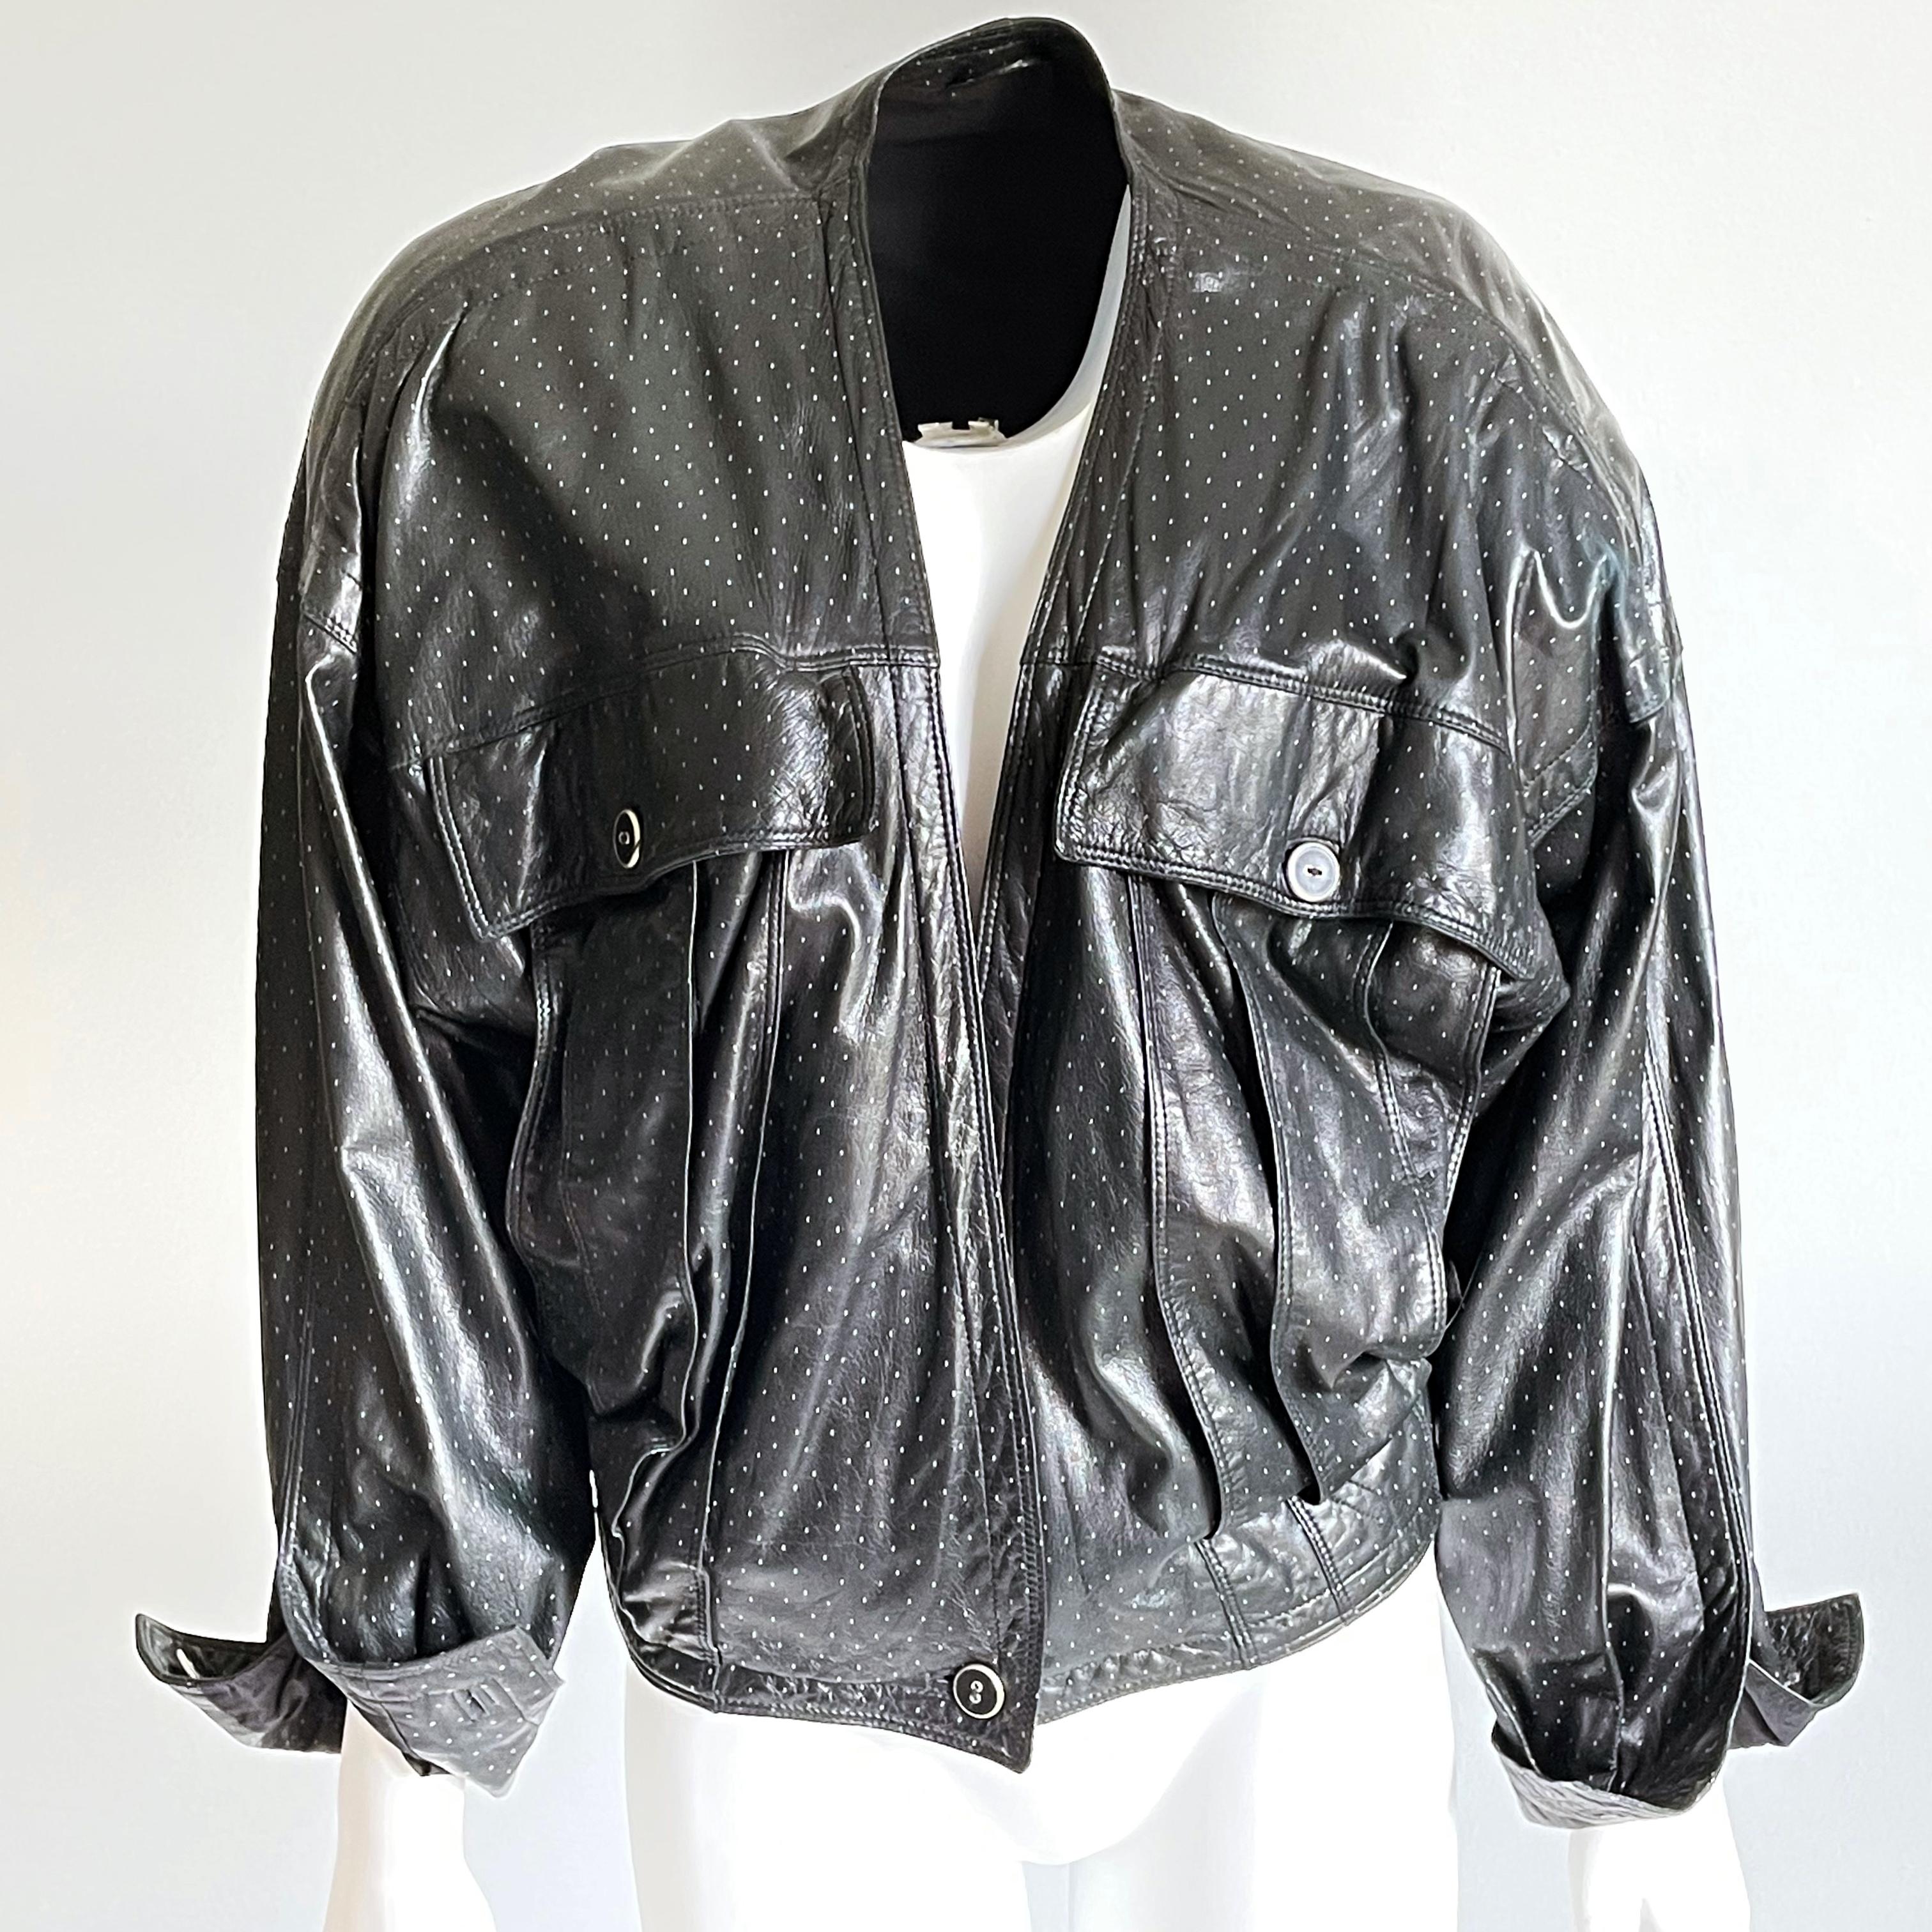 Authentic, preowned, vintage Gianni Versace leather bomber jacket, most likely made in the early 90s.  Super rare jacket! Made from black lambskin that has tiny gray flecks throughout!.  Fastens at the waist with a single button, is fully lined and